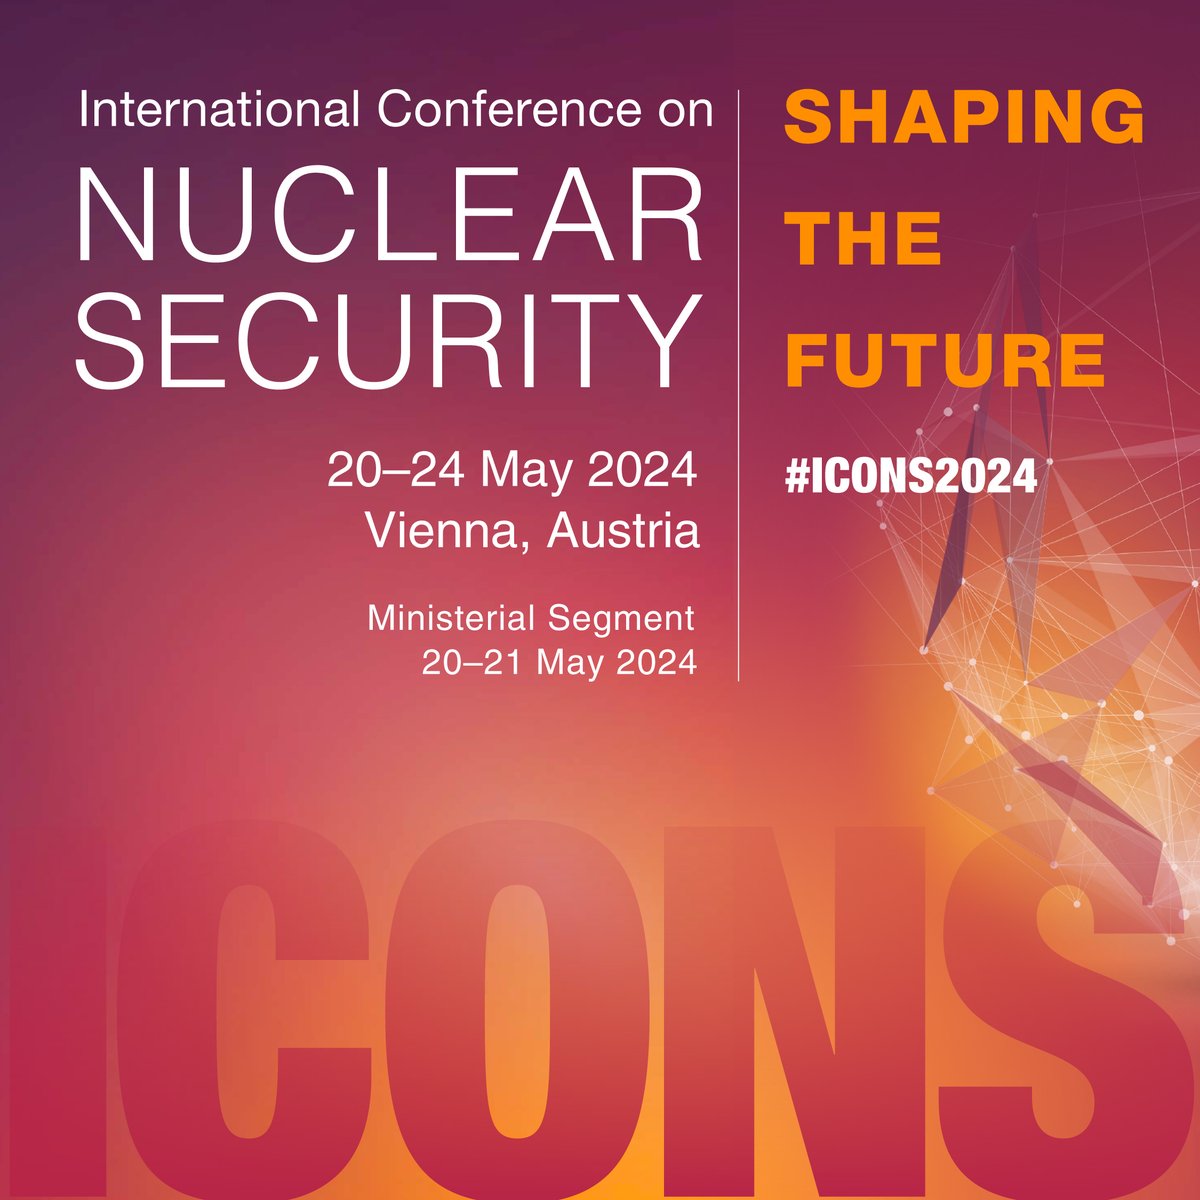 🎙️ Media advisory: Press arrangements for #ICONS2024, the fourth IAEA ministerial conference on nuclear security.
🔗bit.ly/4bAobgD